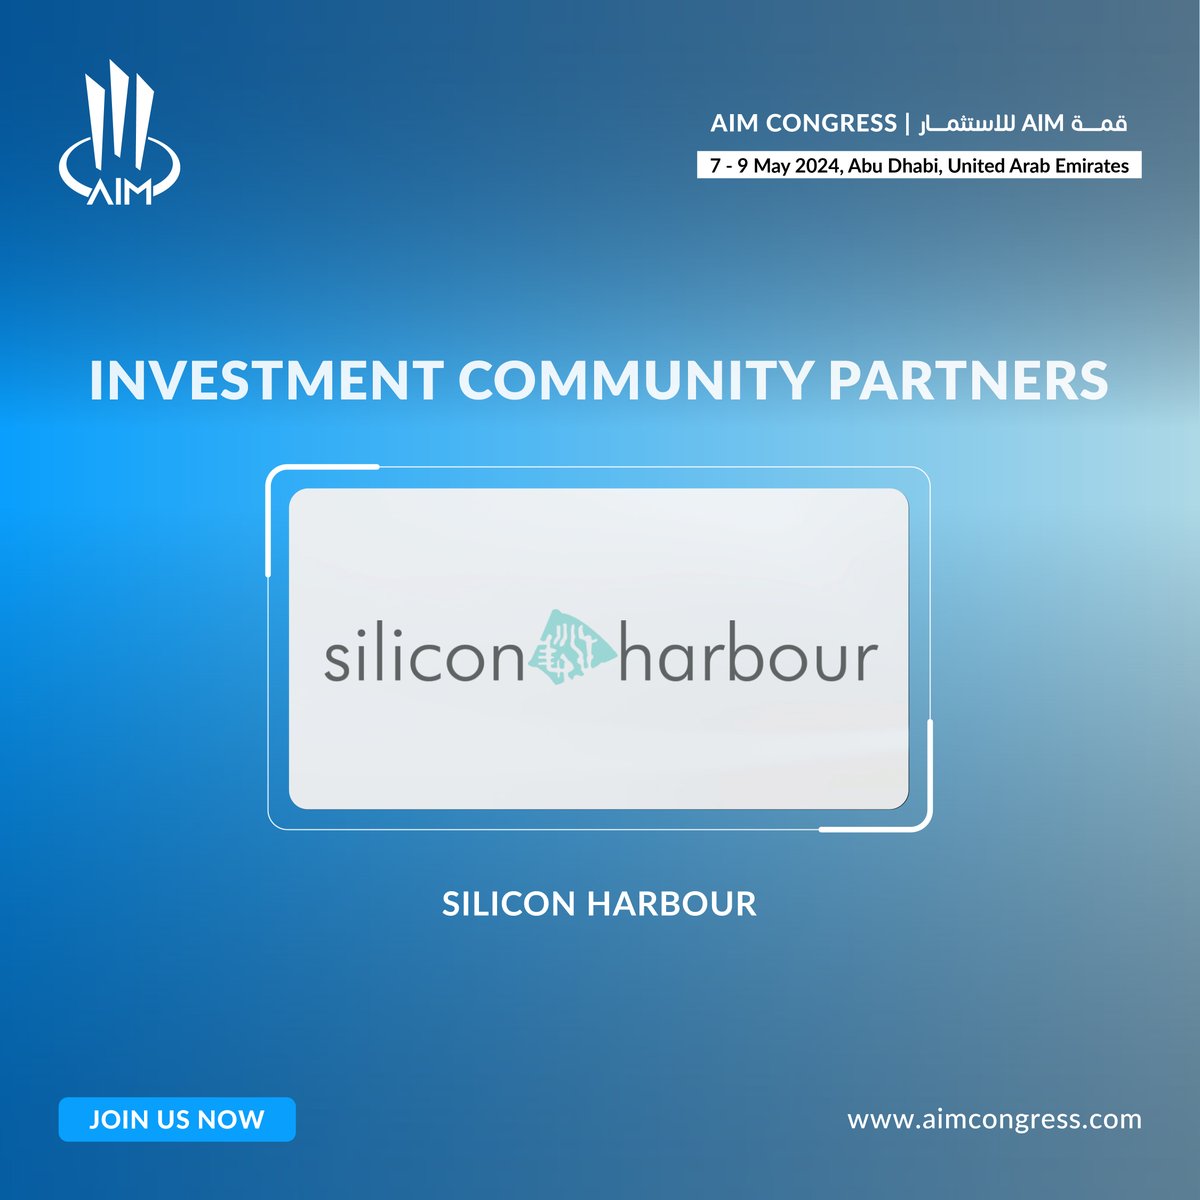 We are thrilled to feature Silicon Harbour as one of our premier Investment Community Partners. 

Discover the cutting-edge innovations and investment opportunities Silicon Harbour brings to the table. 

#AIMCongress2024 #SiliconHarbour #TechInvestment #InnovationLeadership